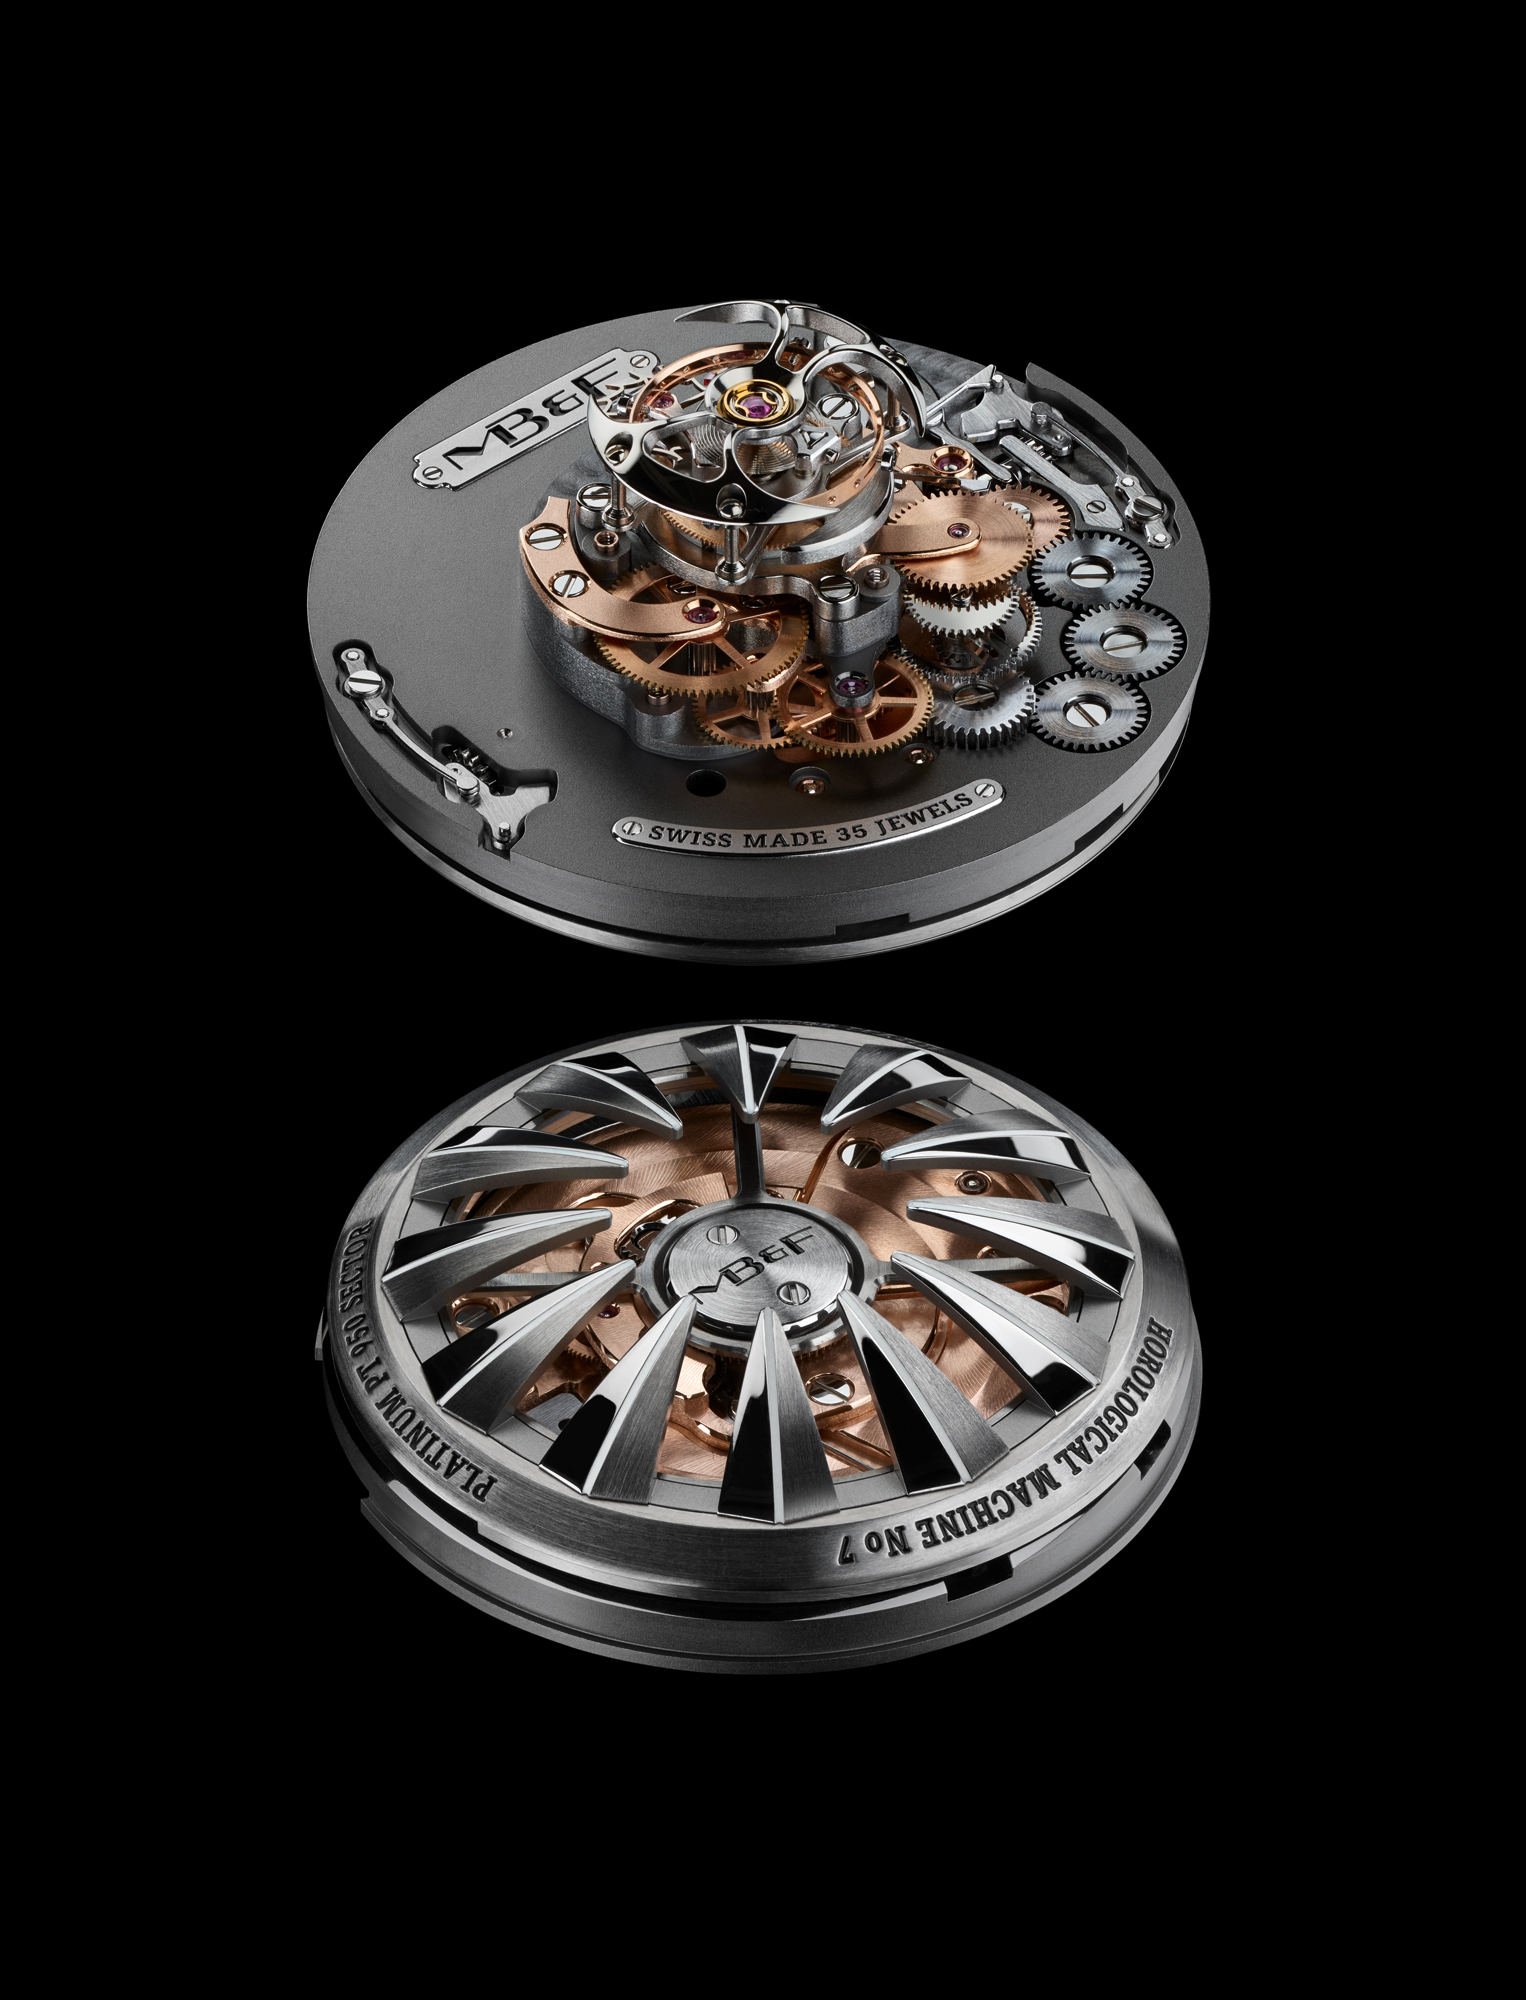 From bottom to top, the winding rotor, mainspring barrel, hour and minute indications, and flying tourbillon are all concentrically mounted around the central axis. Energy travels from the rotor at the very bottom of the movement to the flying tourbillon regulator at the very top via gearing acting like a series of stairs, allowing power to transition from one level to the next. This concentric architecture allows for the hours and minutes to be displayed around the periphery of the movement; however, this presented a serious challenge in itself: how to support such large-diameter time display rings? The answer was to develop extra-large diameter ceramic ball bearings, to support the spherical segment hour and minute displays and rotate with a very low coefficient of friction. The spherical segment discs are in aluminium and titanium for both minimum mass and maximum rigidity.